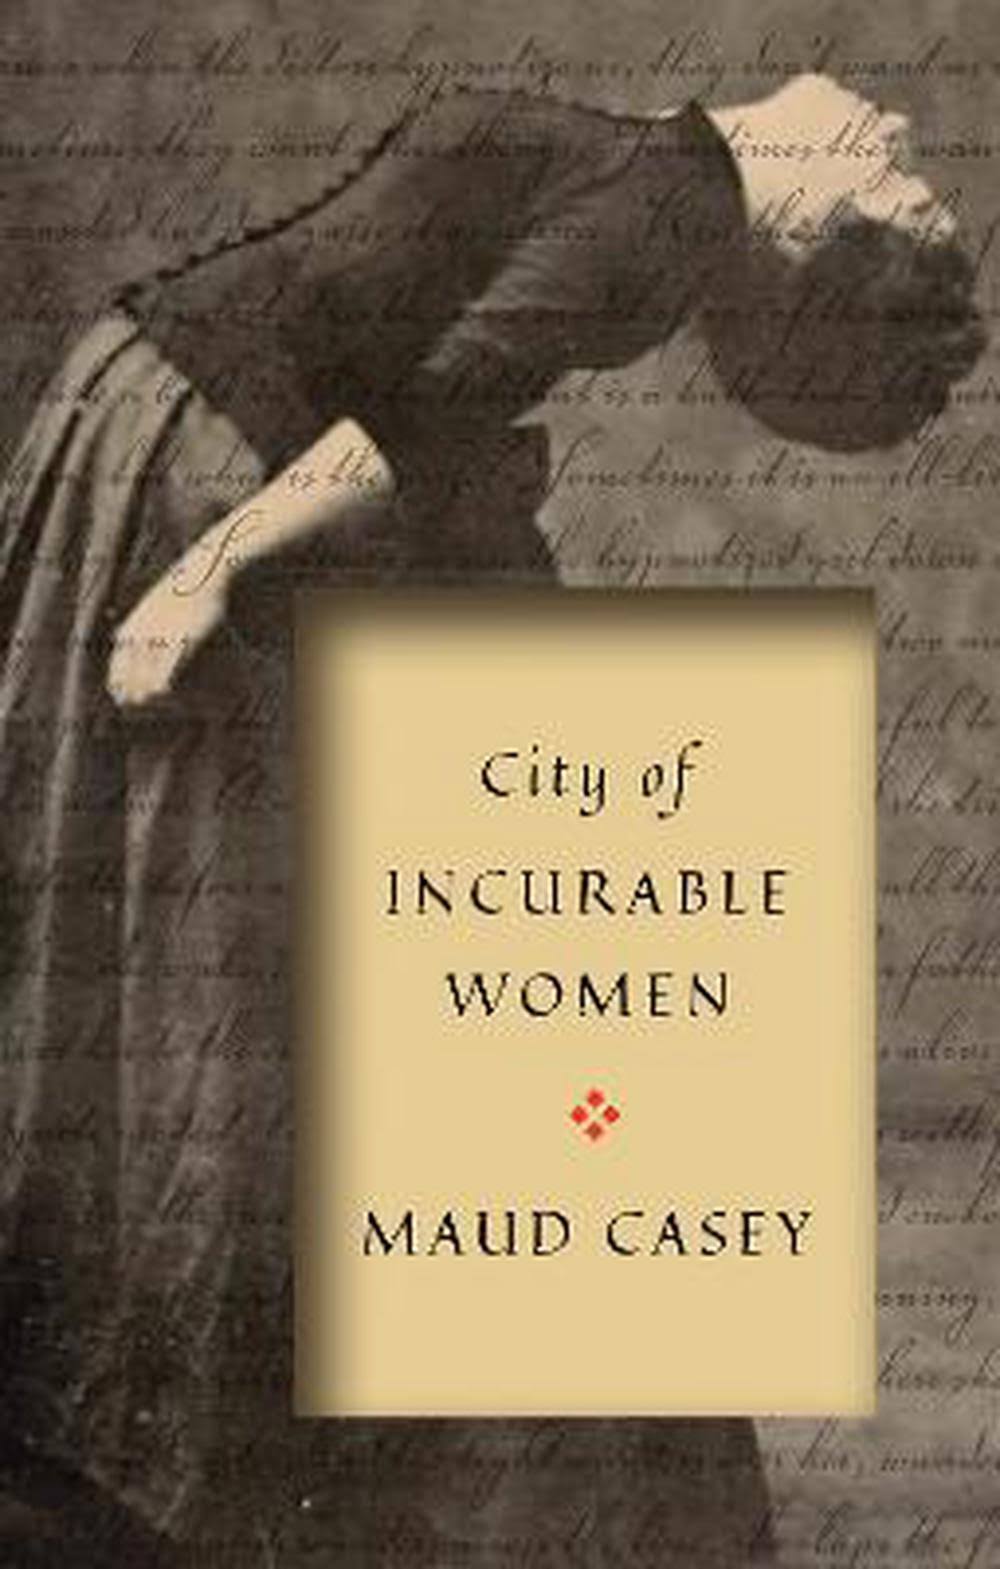 City of Incurable Women by Maud Casey